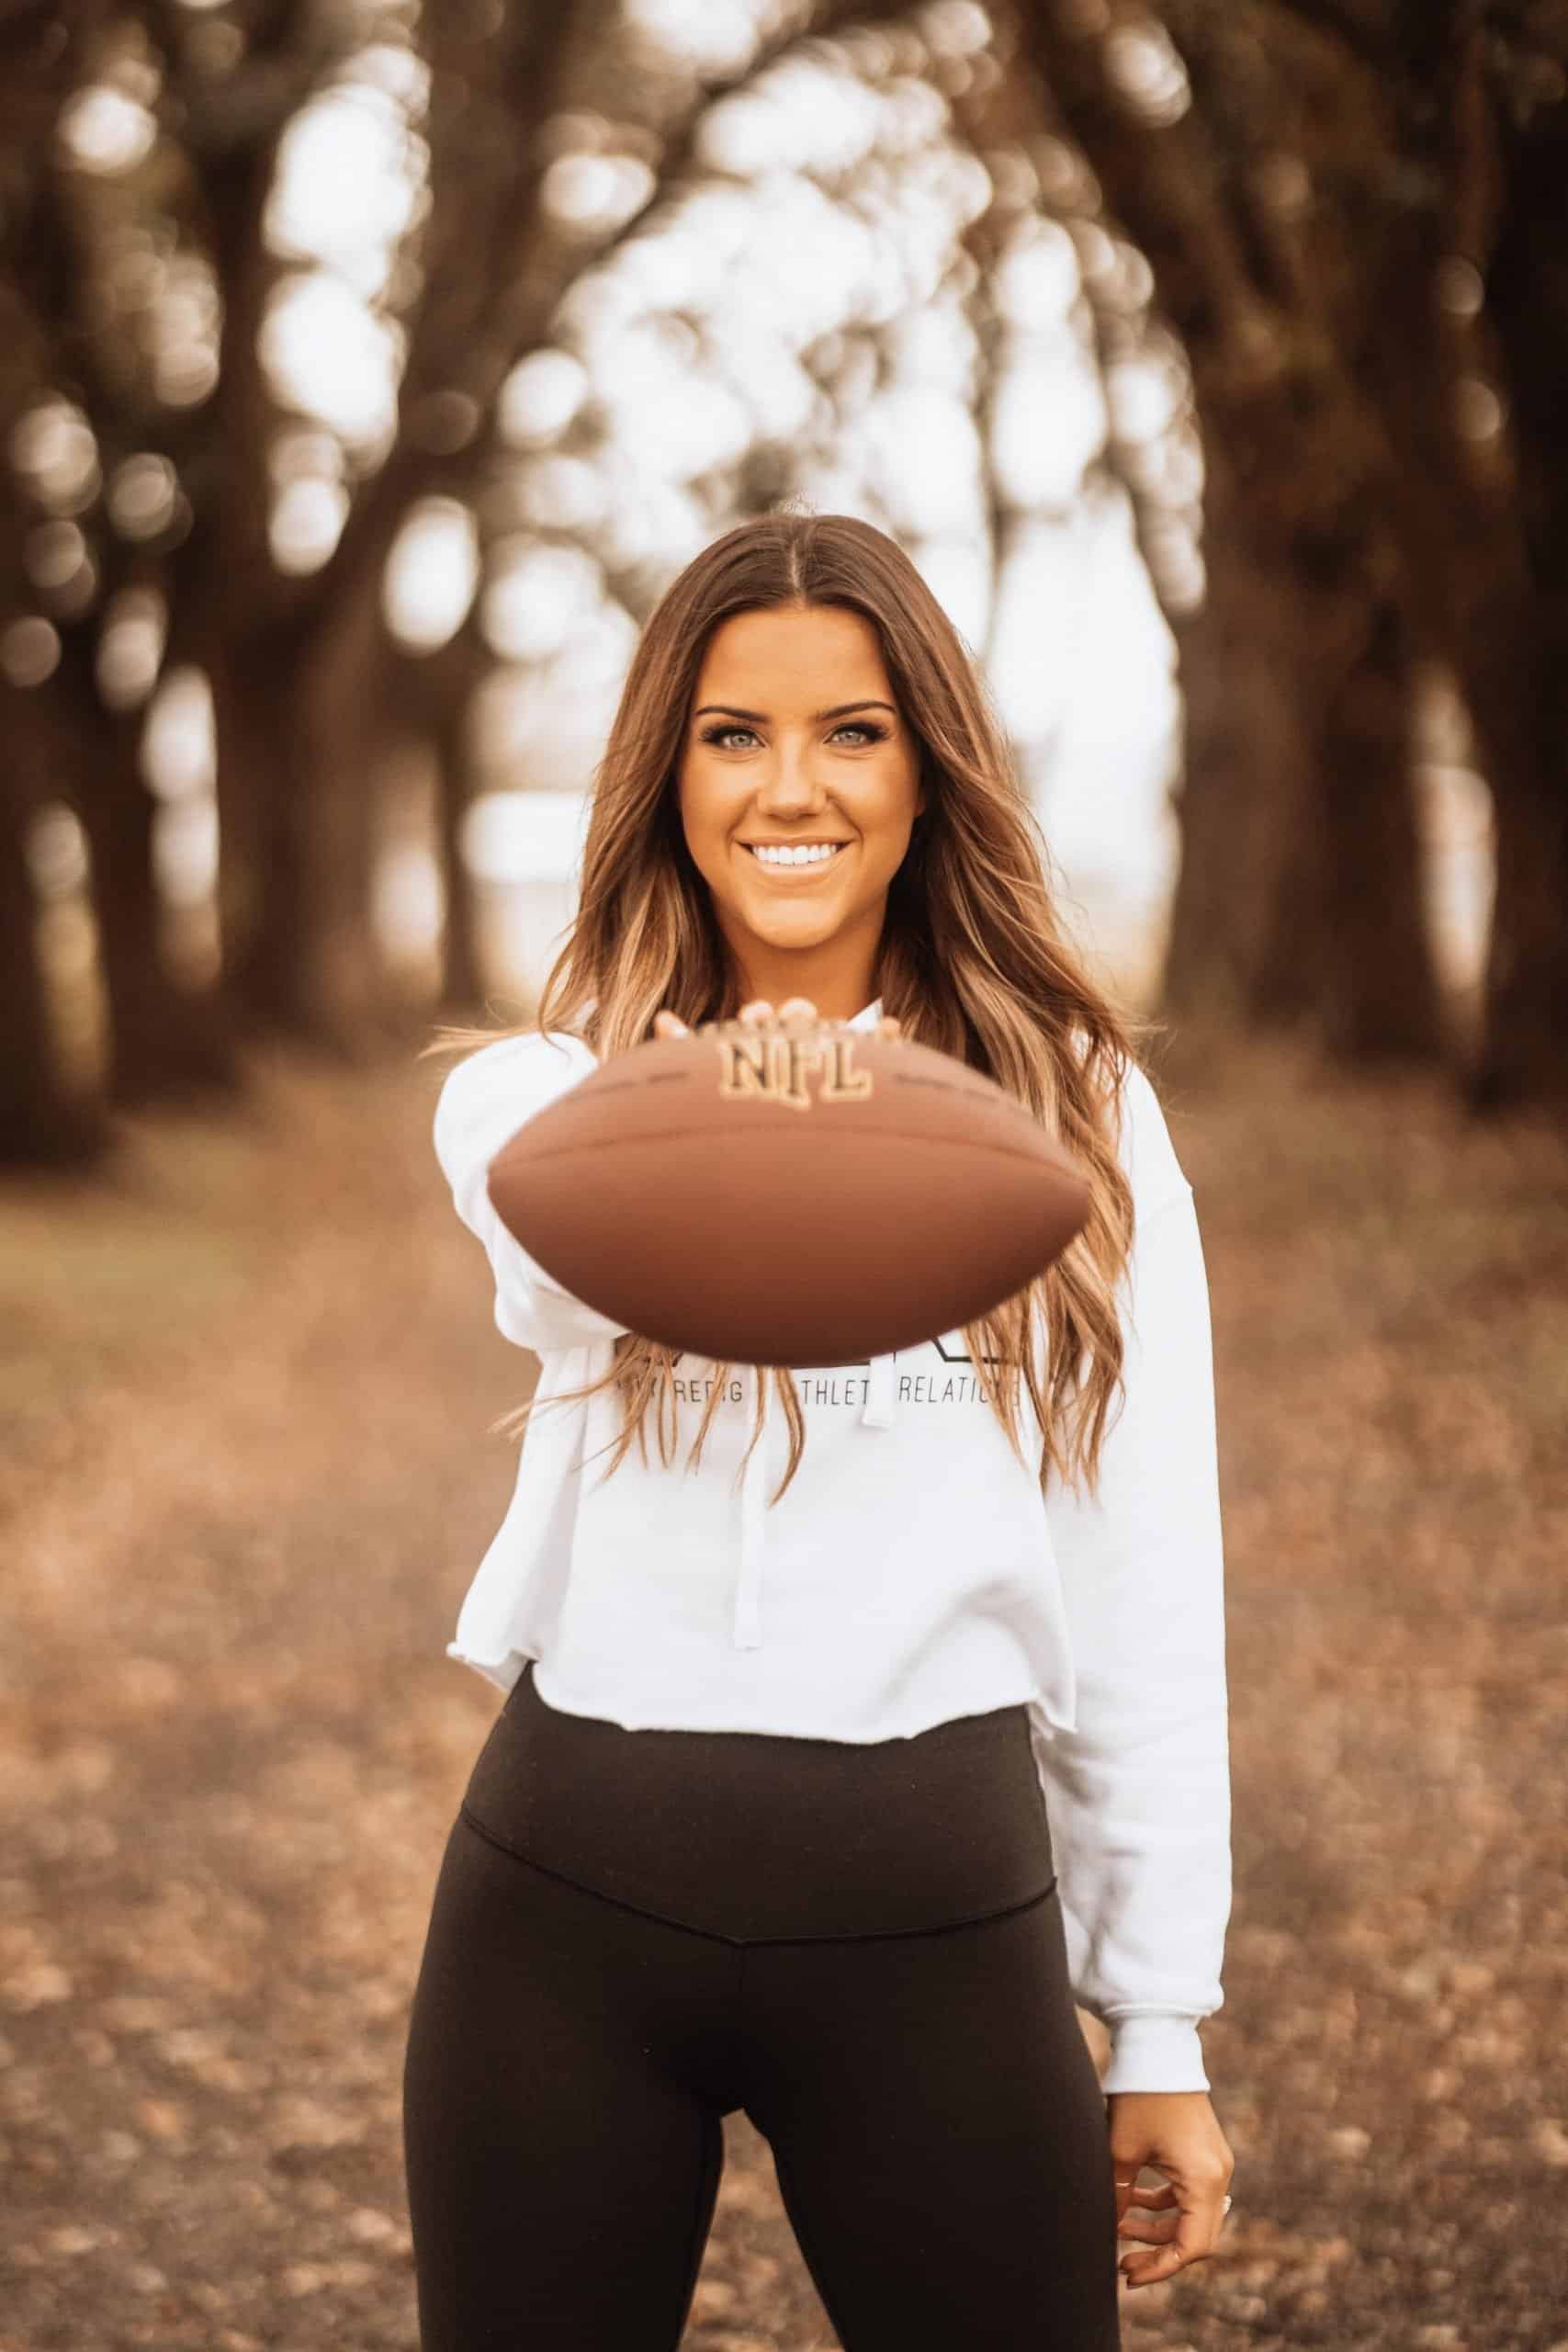 Women in Sports: Meet Ally Redig, professional in athlete relations